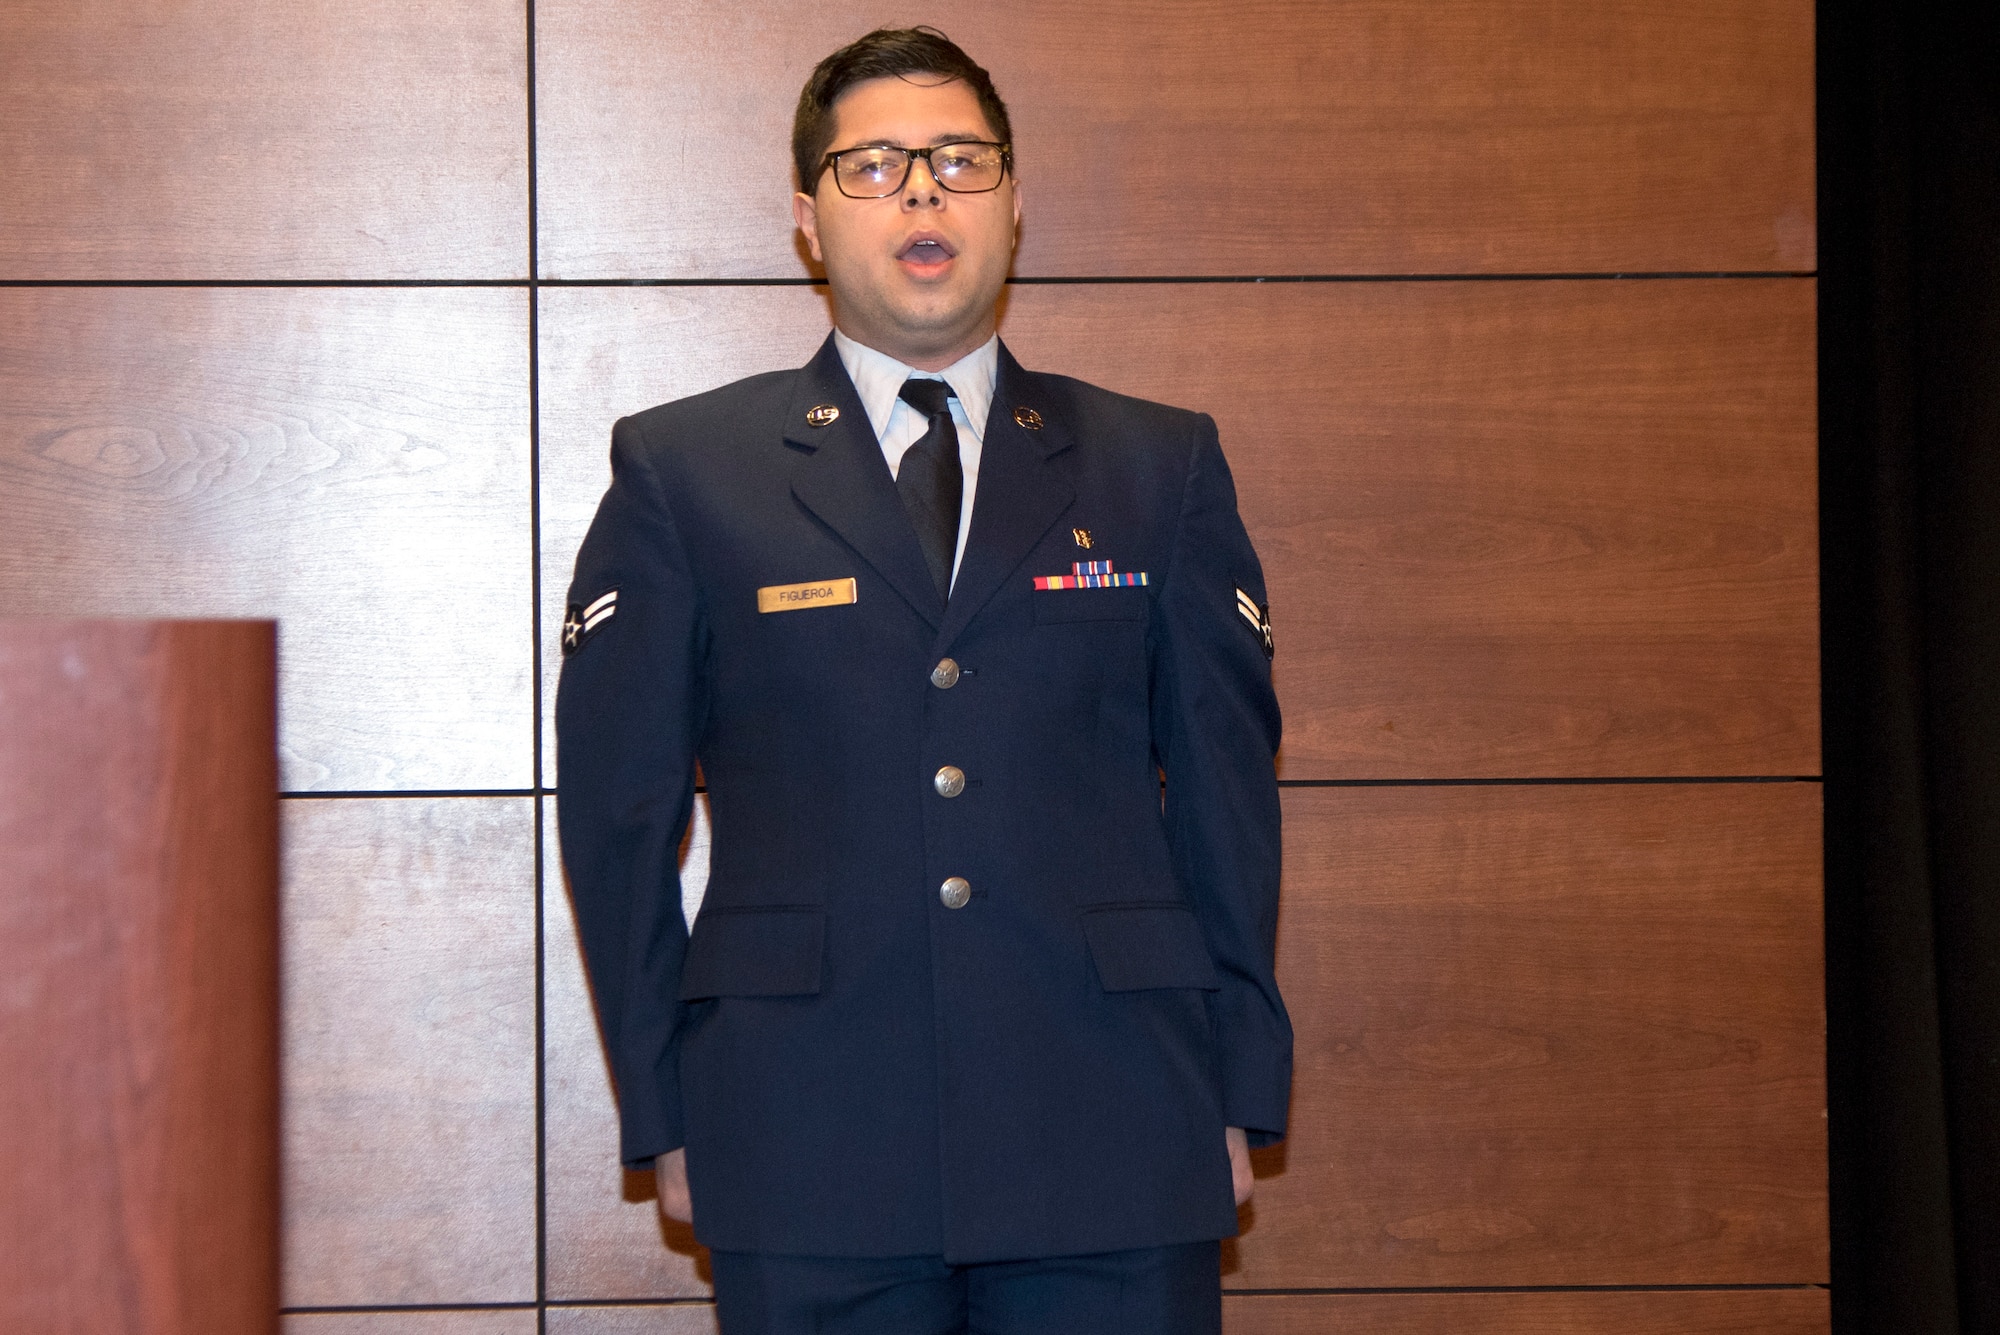 U.S. Air Force Airman 1st Class Jacob Figueroa, a 673d Medical Support Squadron medical laboratory technician, sings the National Anthem during the 32nd Annual Federal Services Dental Meeting at the Arctic Warrior Event Center at JBER, Alaska, Aug. 5, 2021.